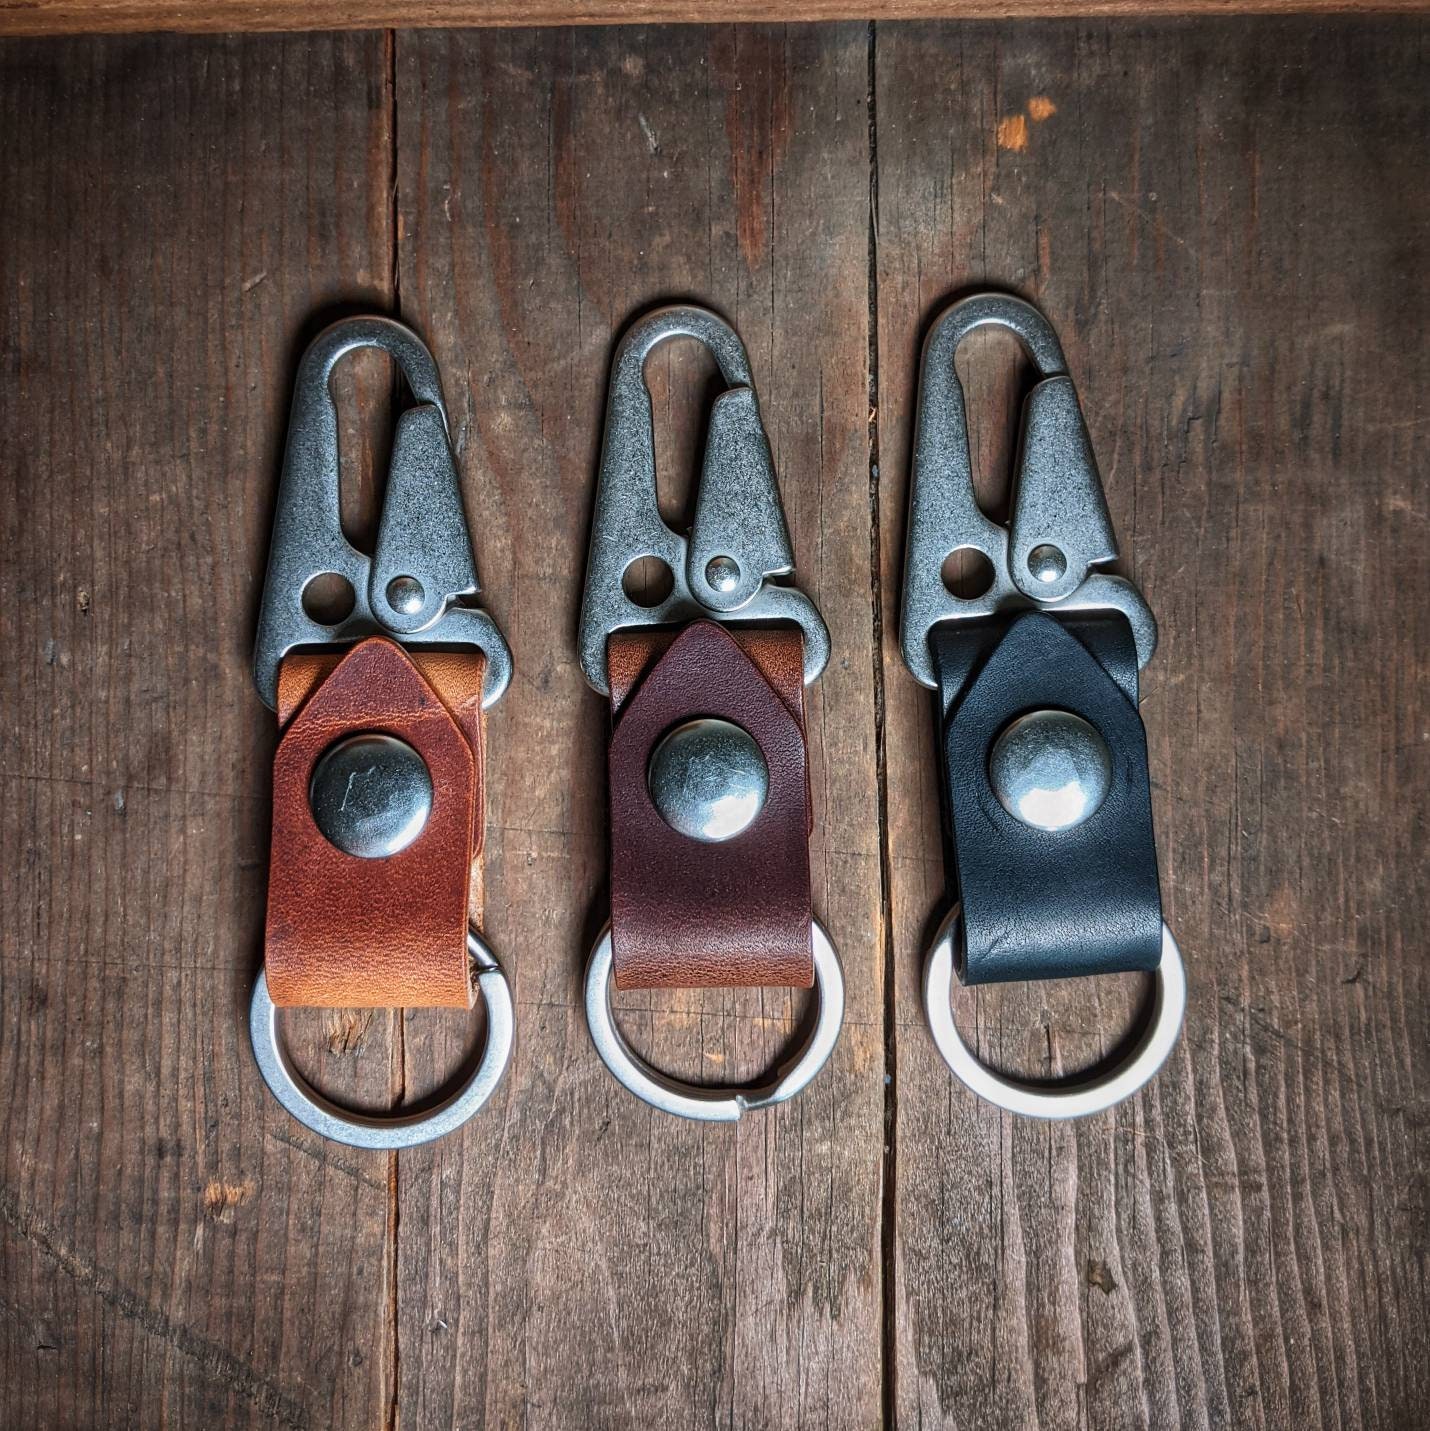 WOOLLY's Clip Leather Keychain